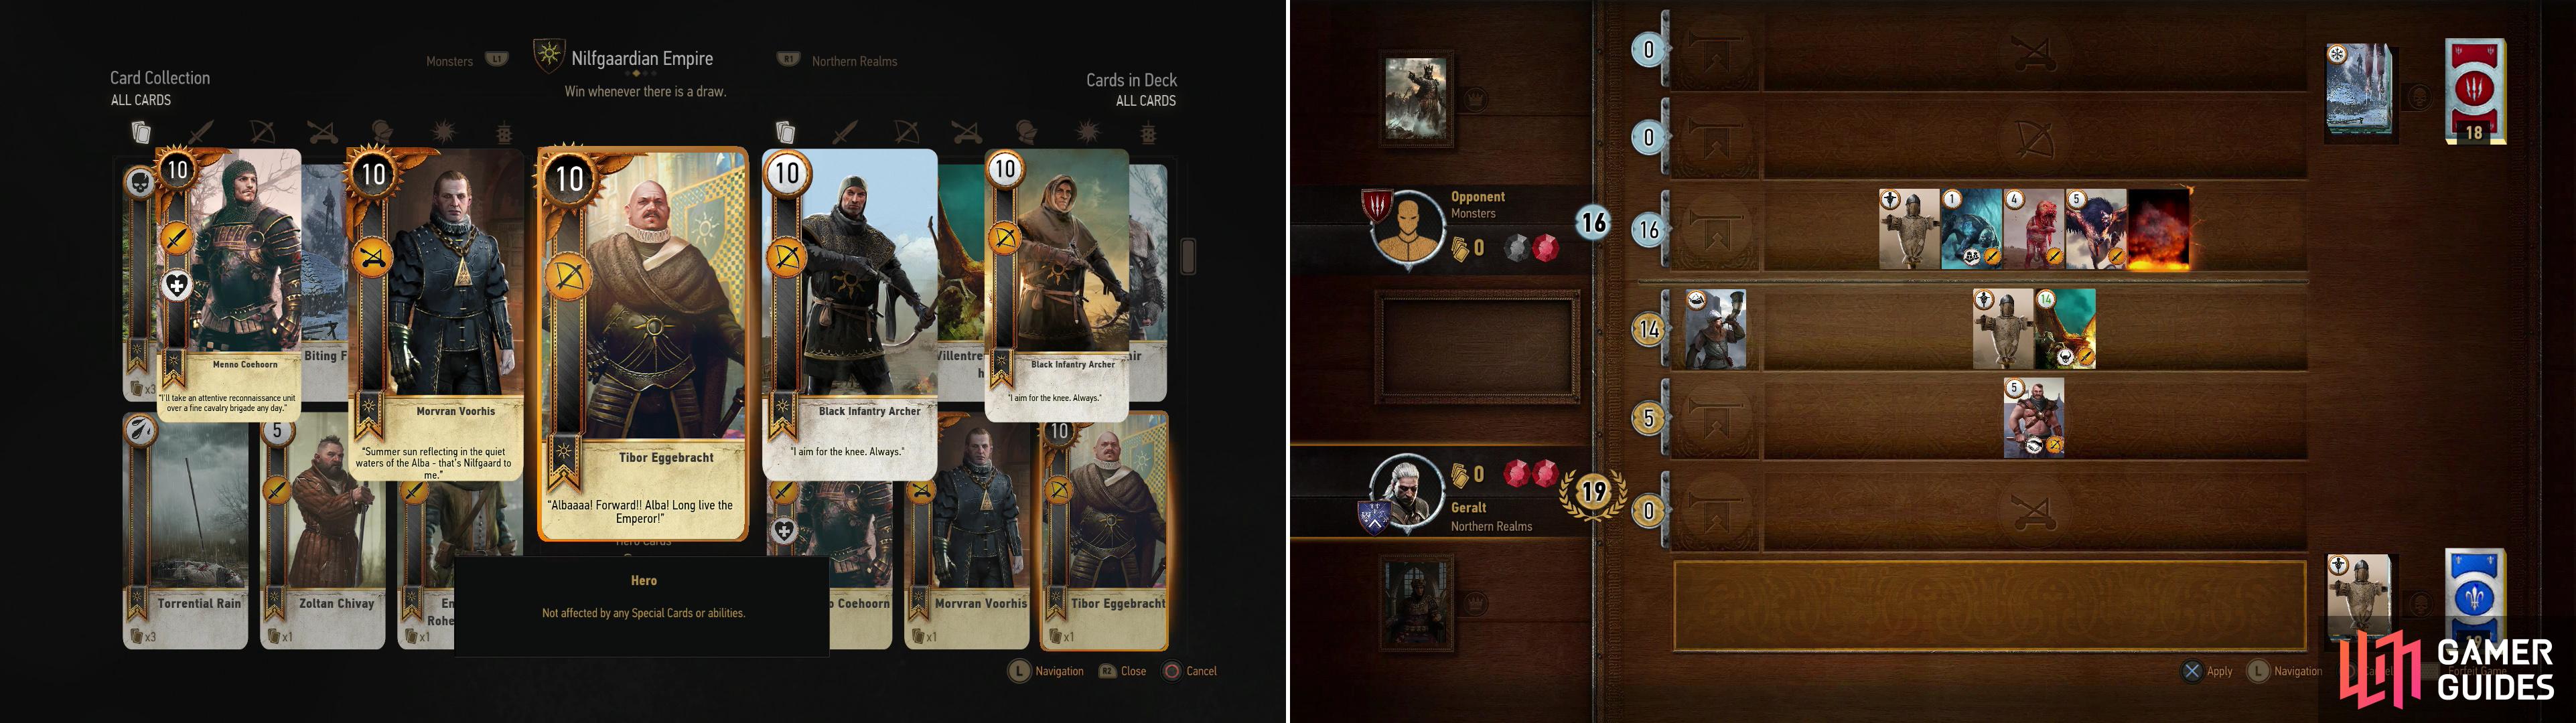 Defeat Olivier at the Kingfisher to win his Tibor Eggebracht Card (left). If you can win the Villentretenmerth card during your games with random Gwent players, you'll be able to use its limited Scorch ability to great effect (right).